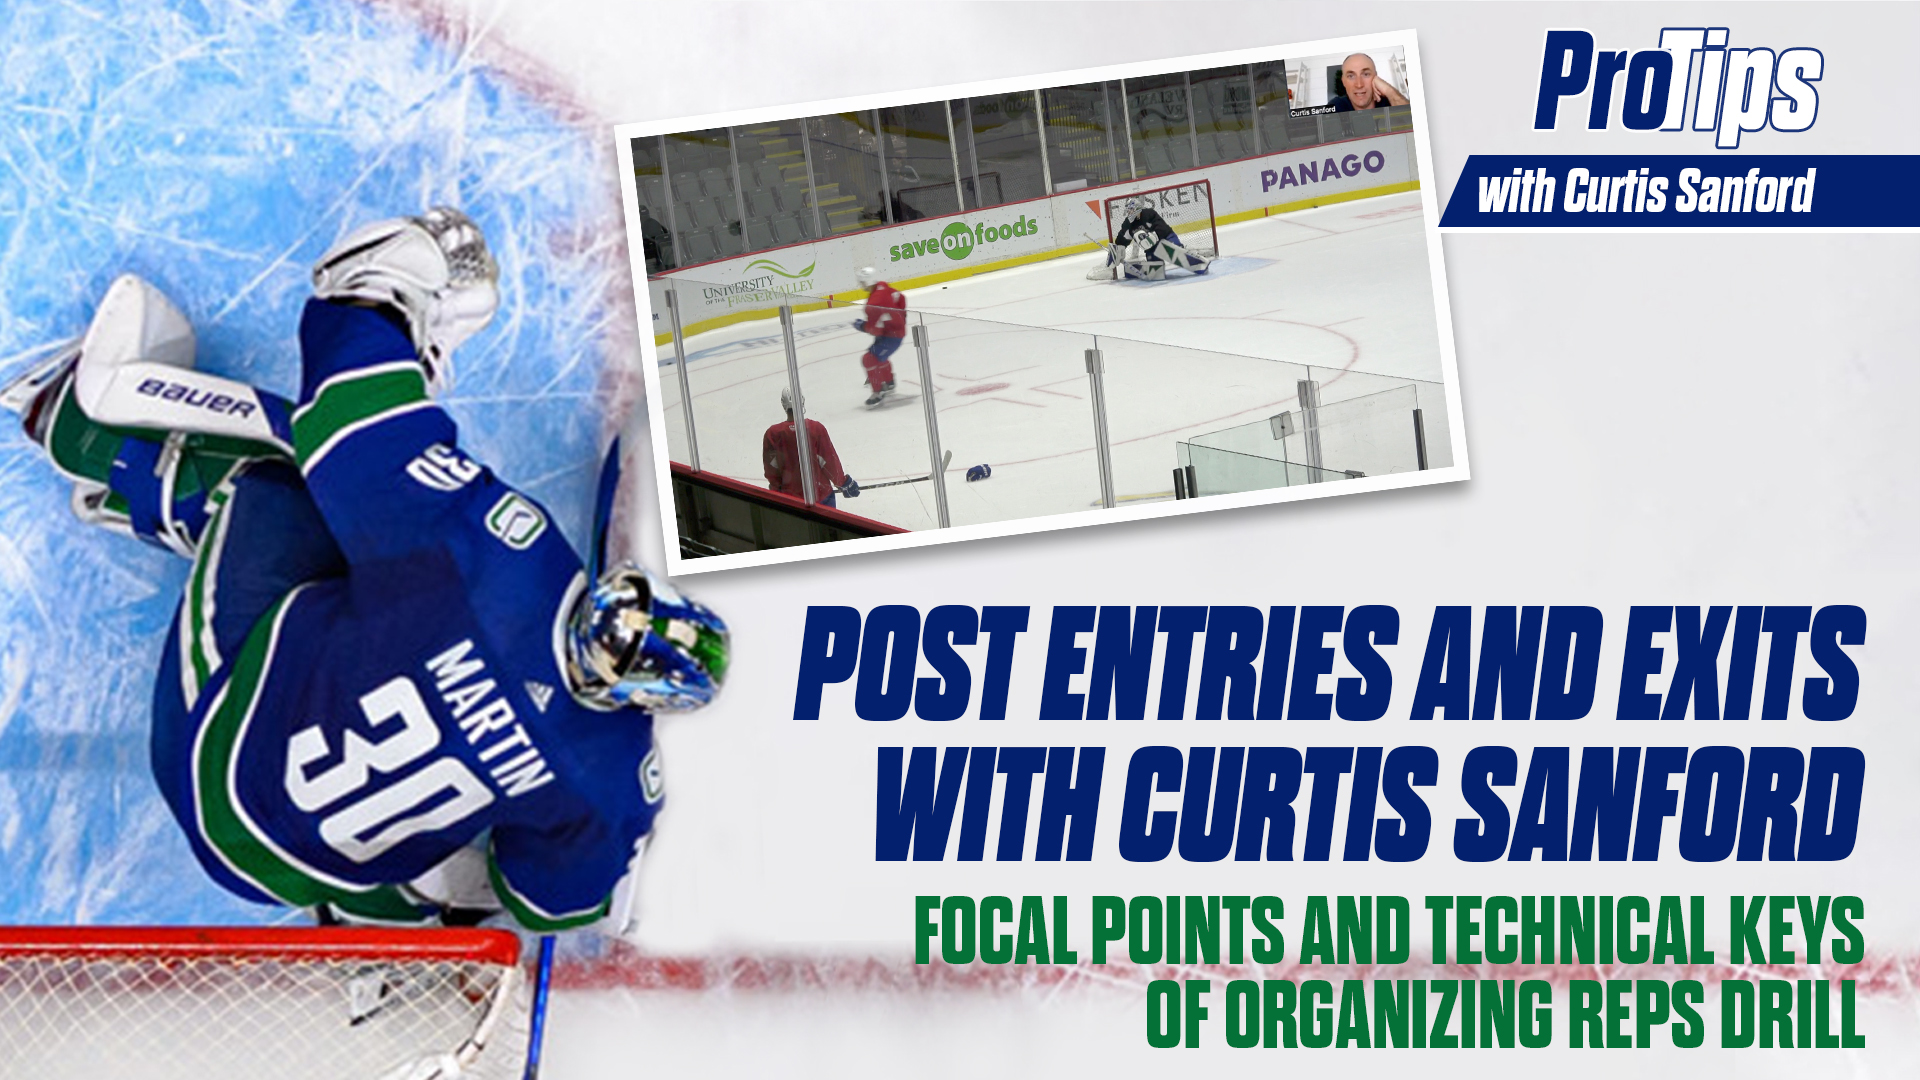 Pro Tips: Post Entries and Exits with Curtis Sanford